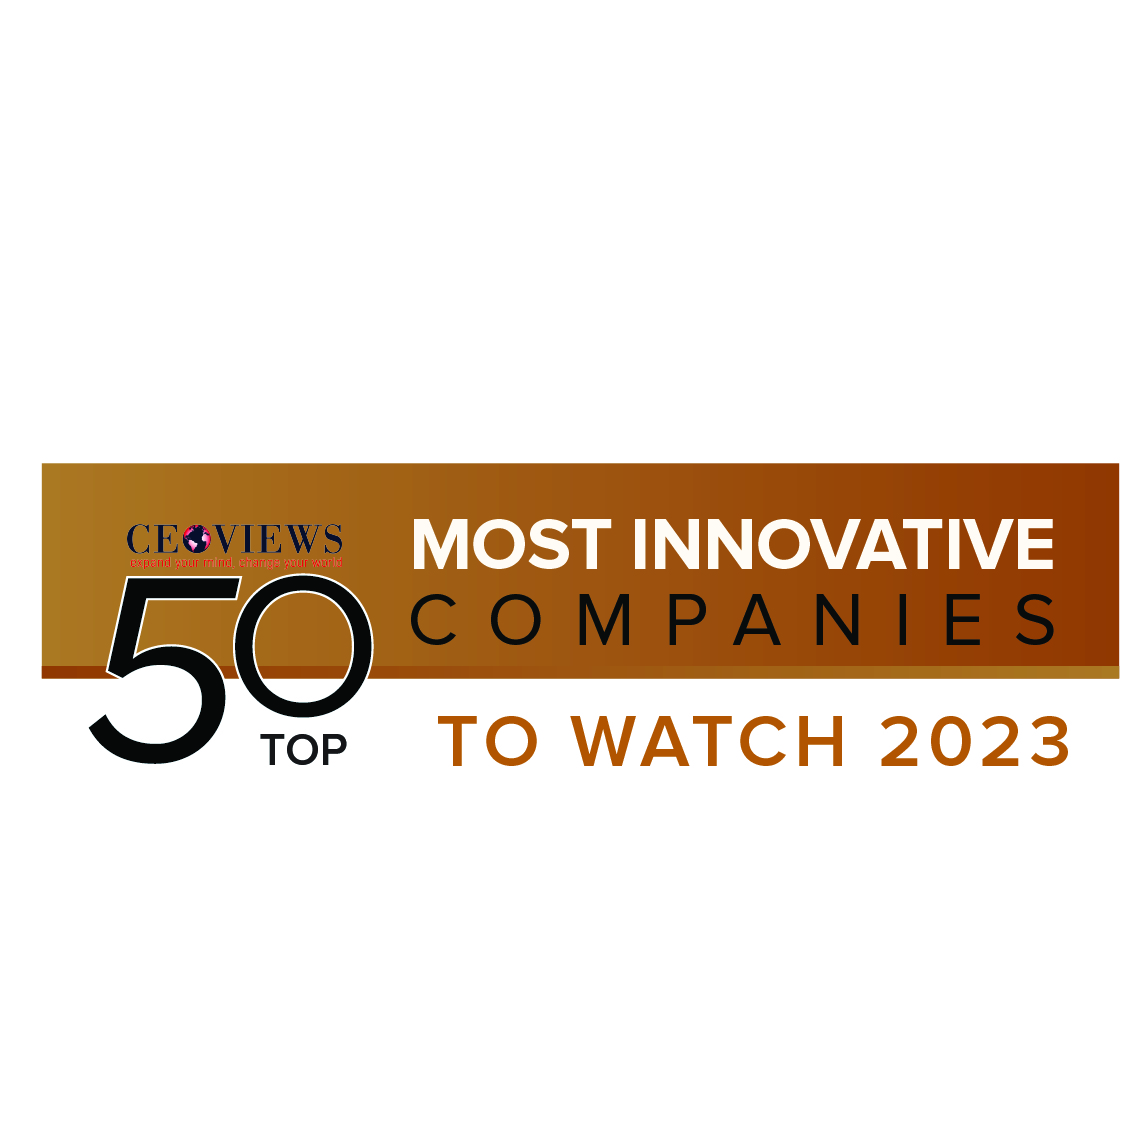 Top 50 Most Innovative companies to watch 2023